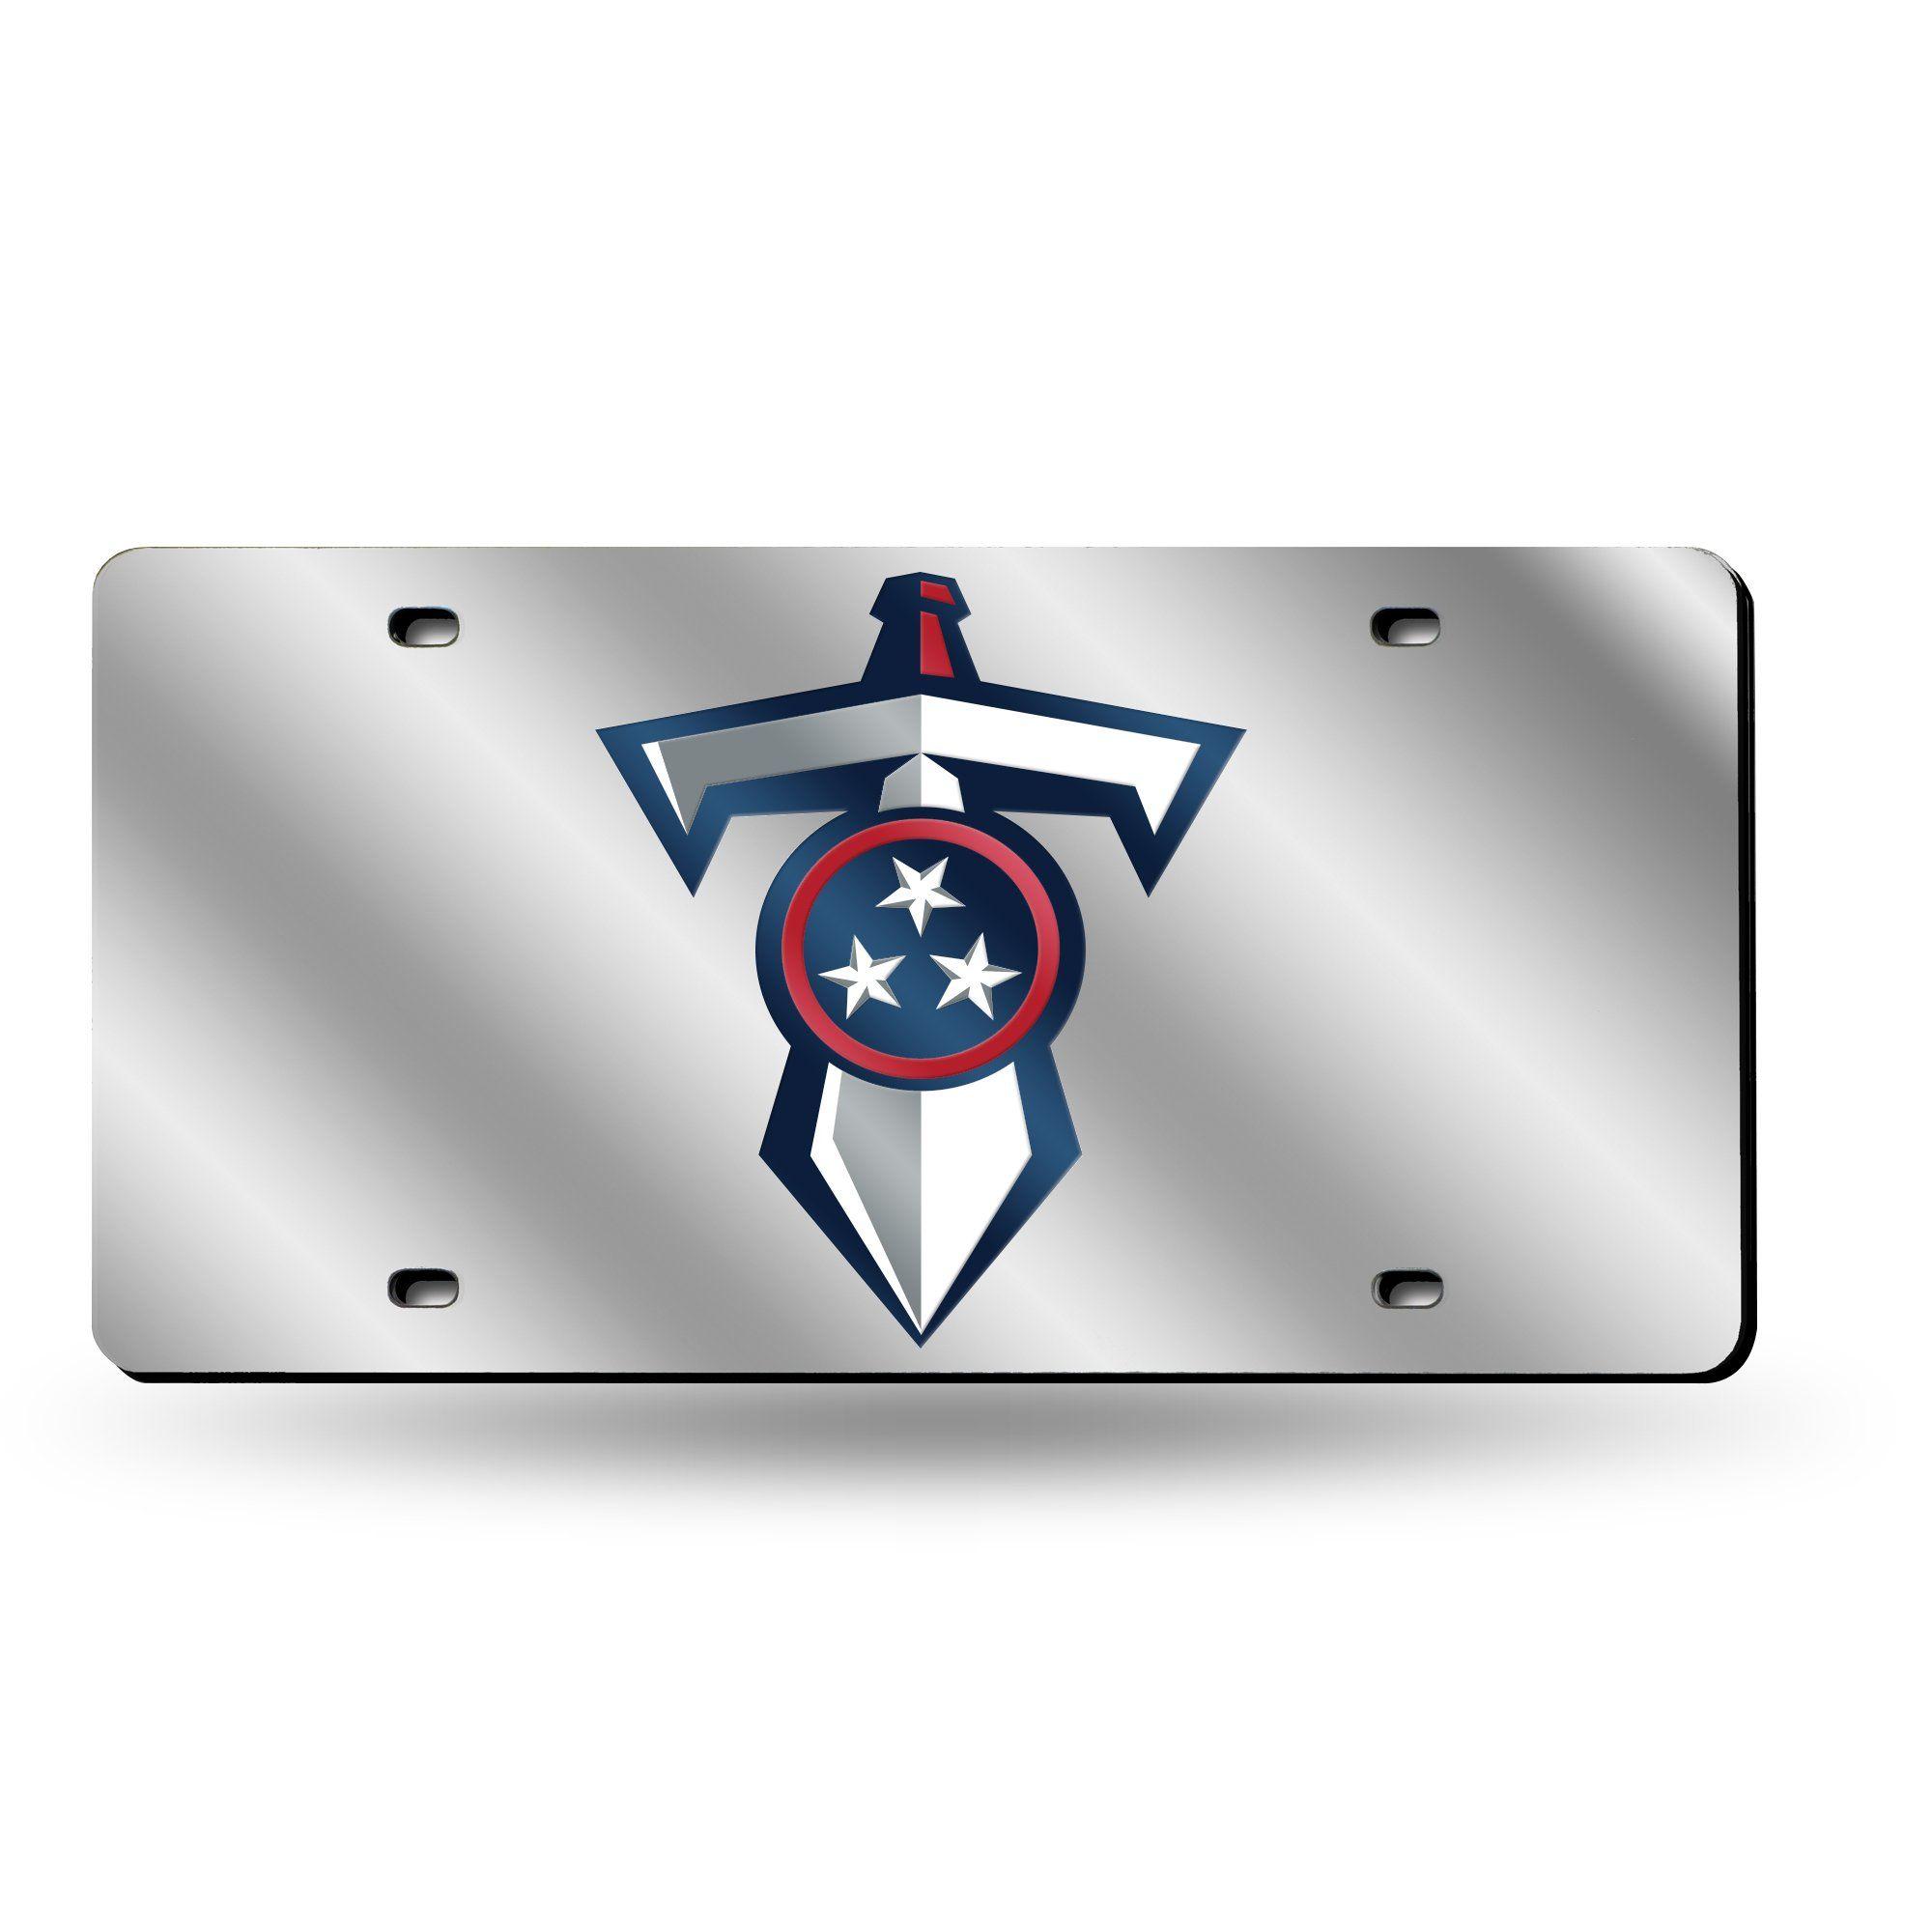 Titans Sword Logo - NFL Tennessee Titans Shield and Sword Logo Laser License Plate Tag